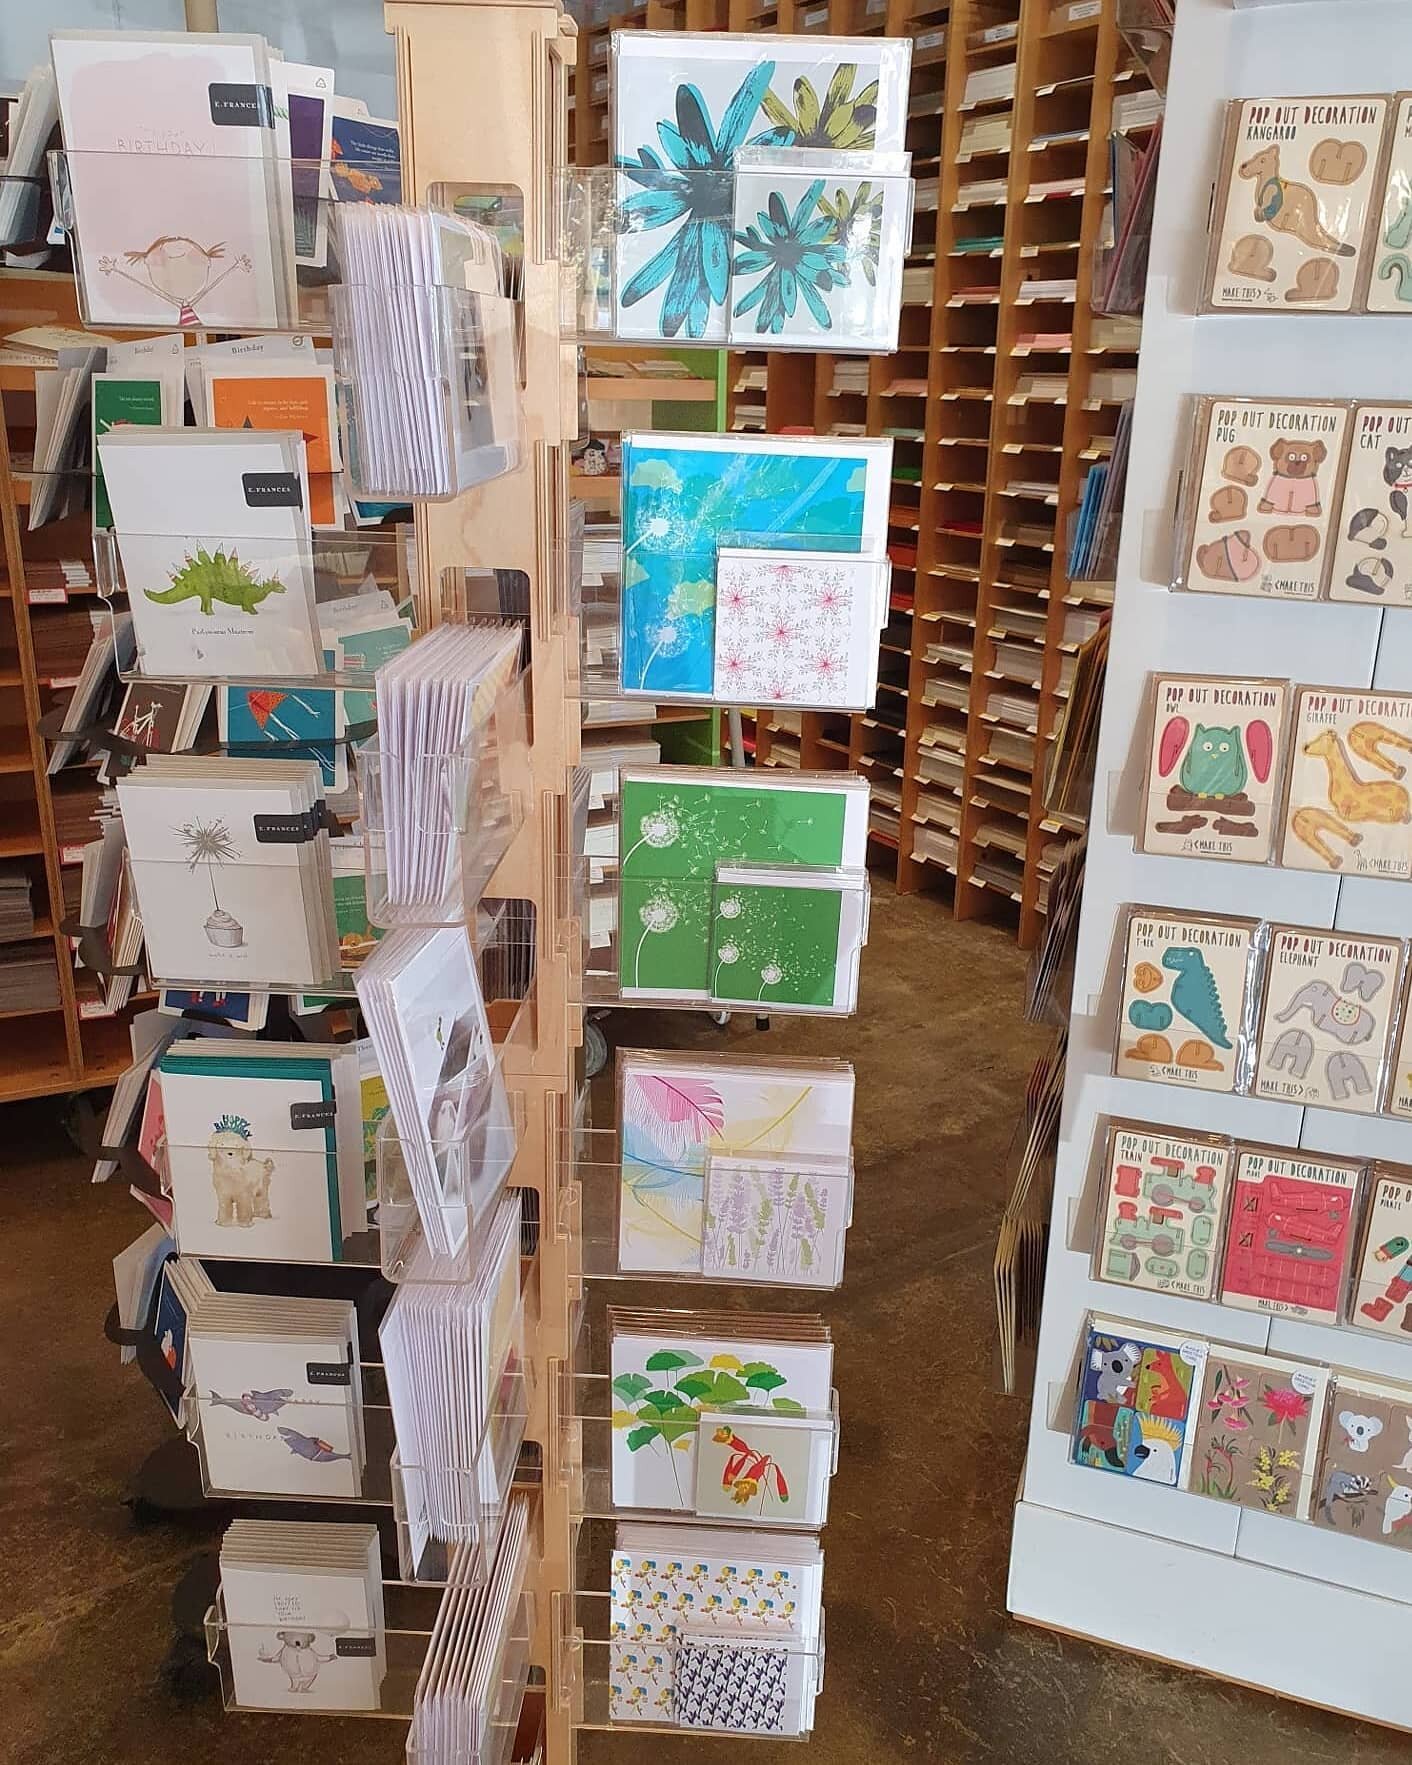 So my exciting news! My greeting and gift cards are now for sale at Paperpoint South Melbourne! Pop in and grab one today! 
.
.
.
.
.
#paperpointaustralia #paperpoint #southmelbourne #coventrystreet #greetingcards #giftcards #melbournemade #illustrat